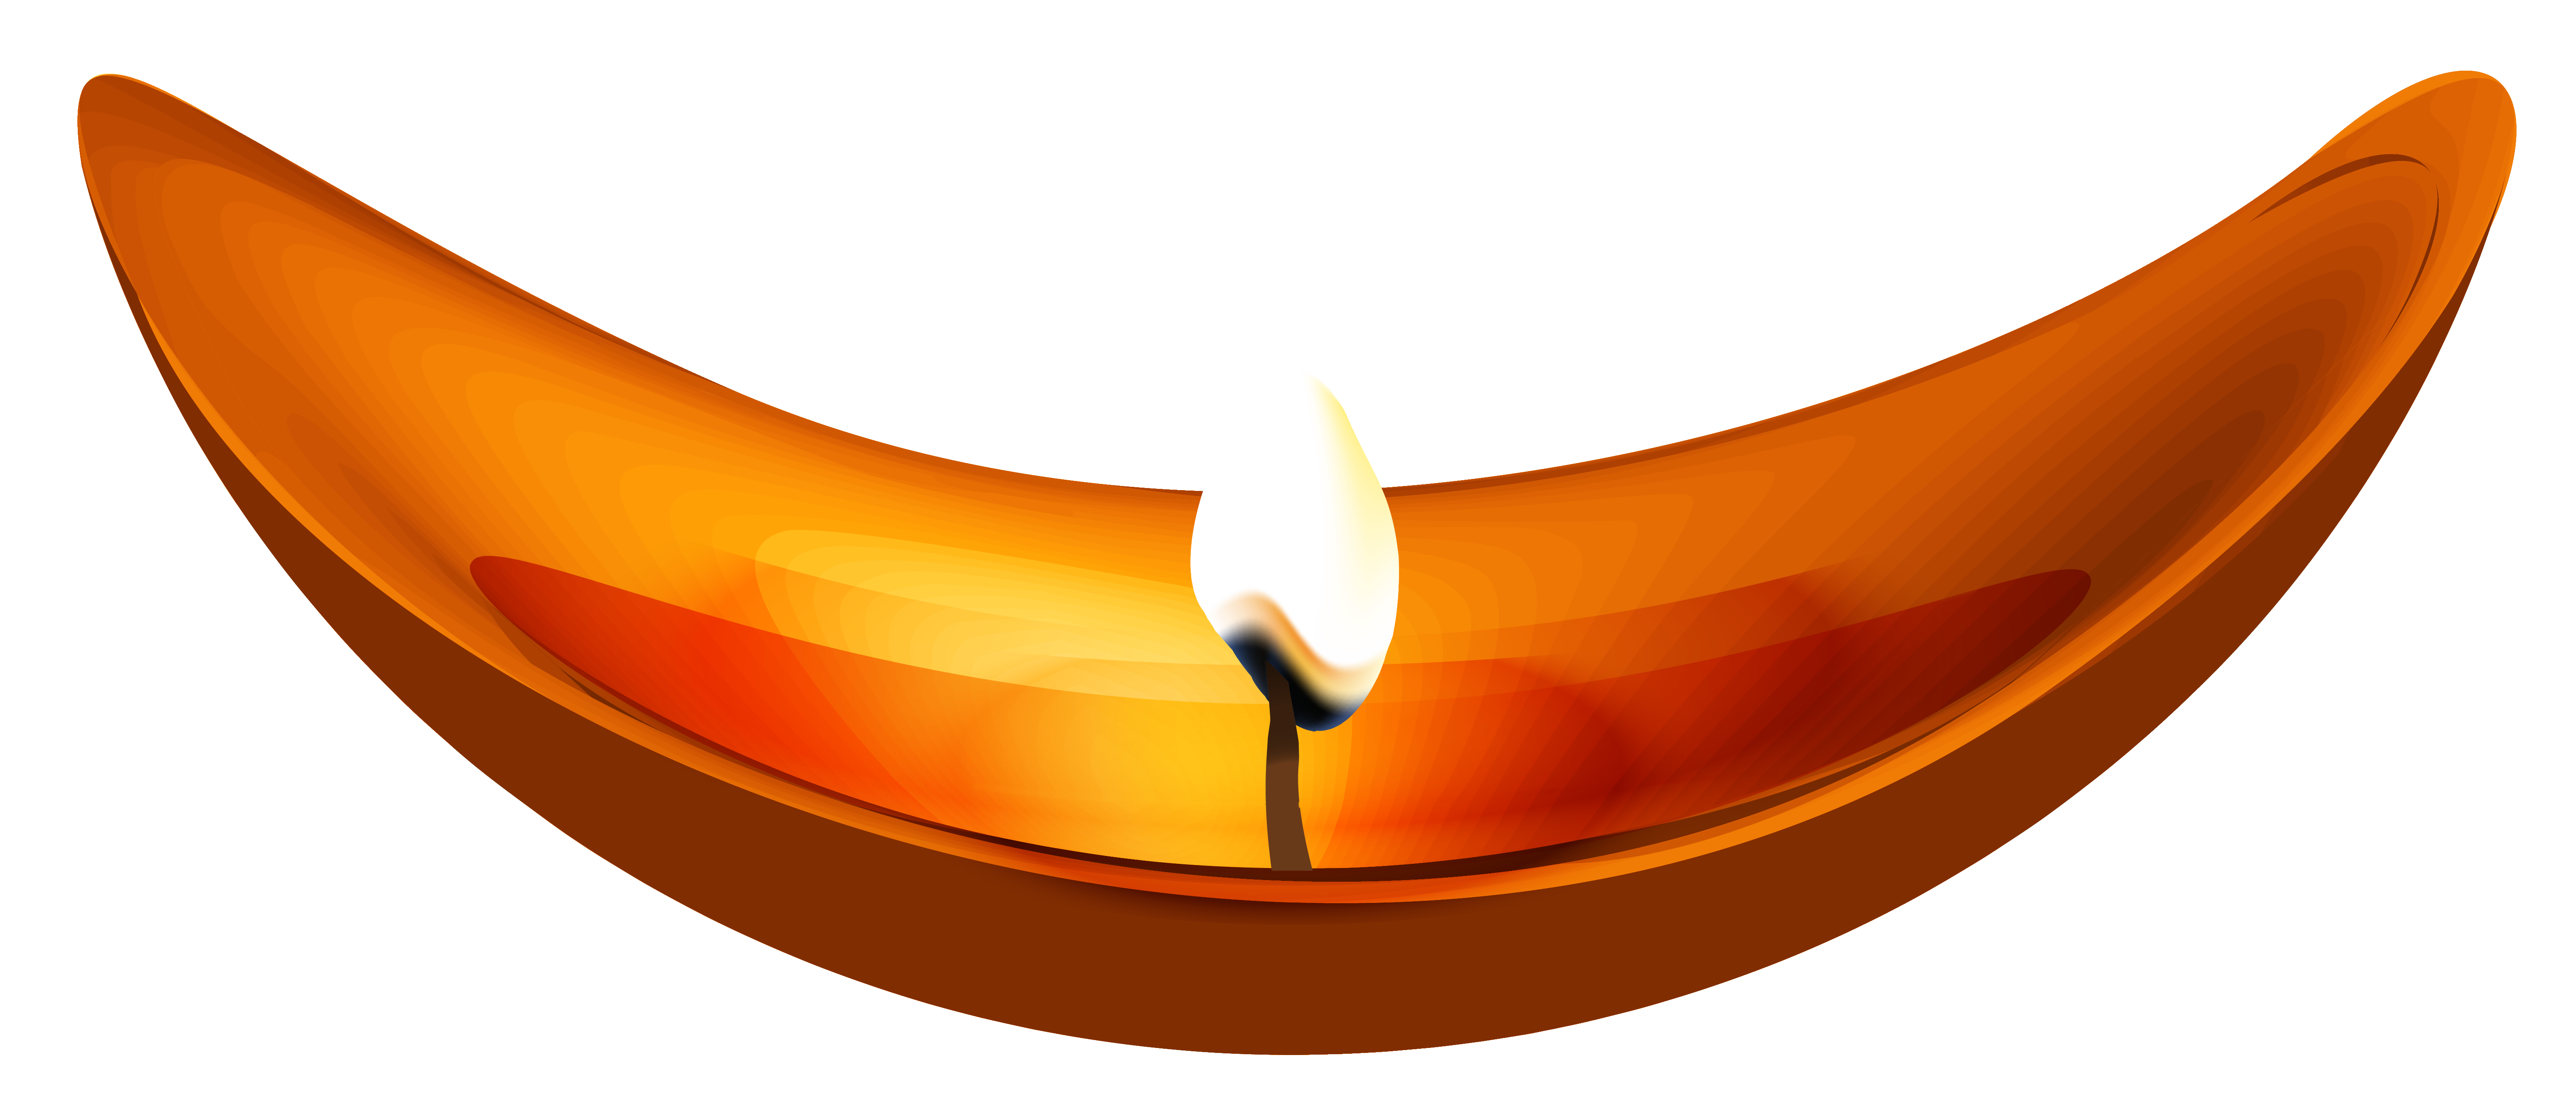 Diwali Candle PNG Clipart Picture​ | Gallery Yopriceville - High-Quality  Free Images and Transparent PNG Clipart